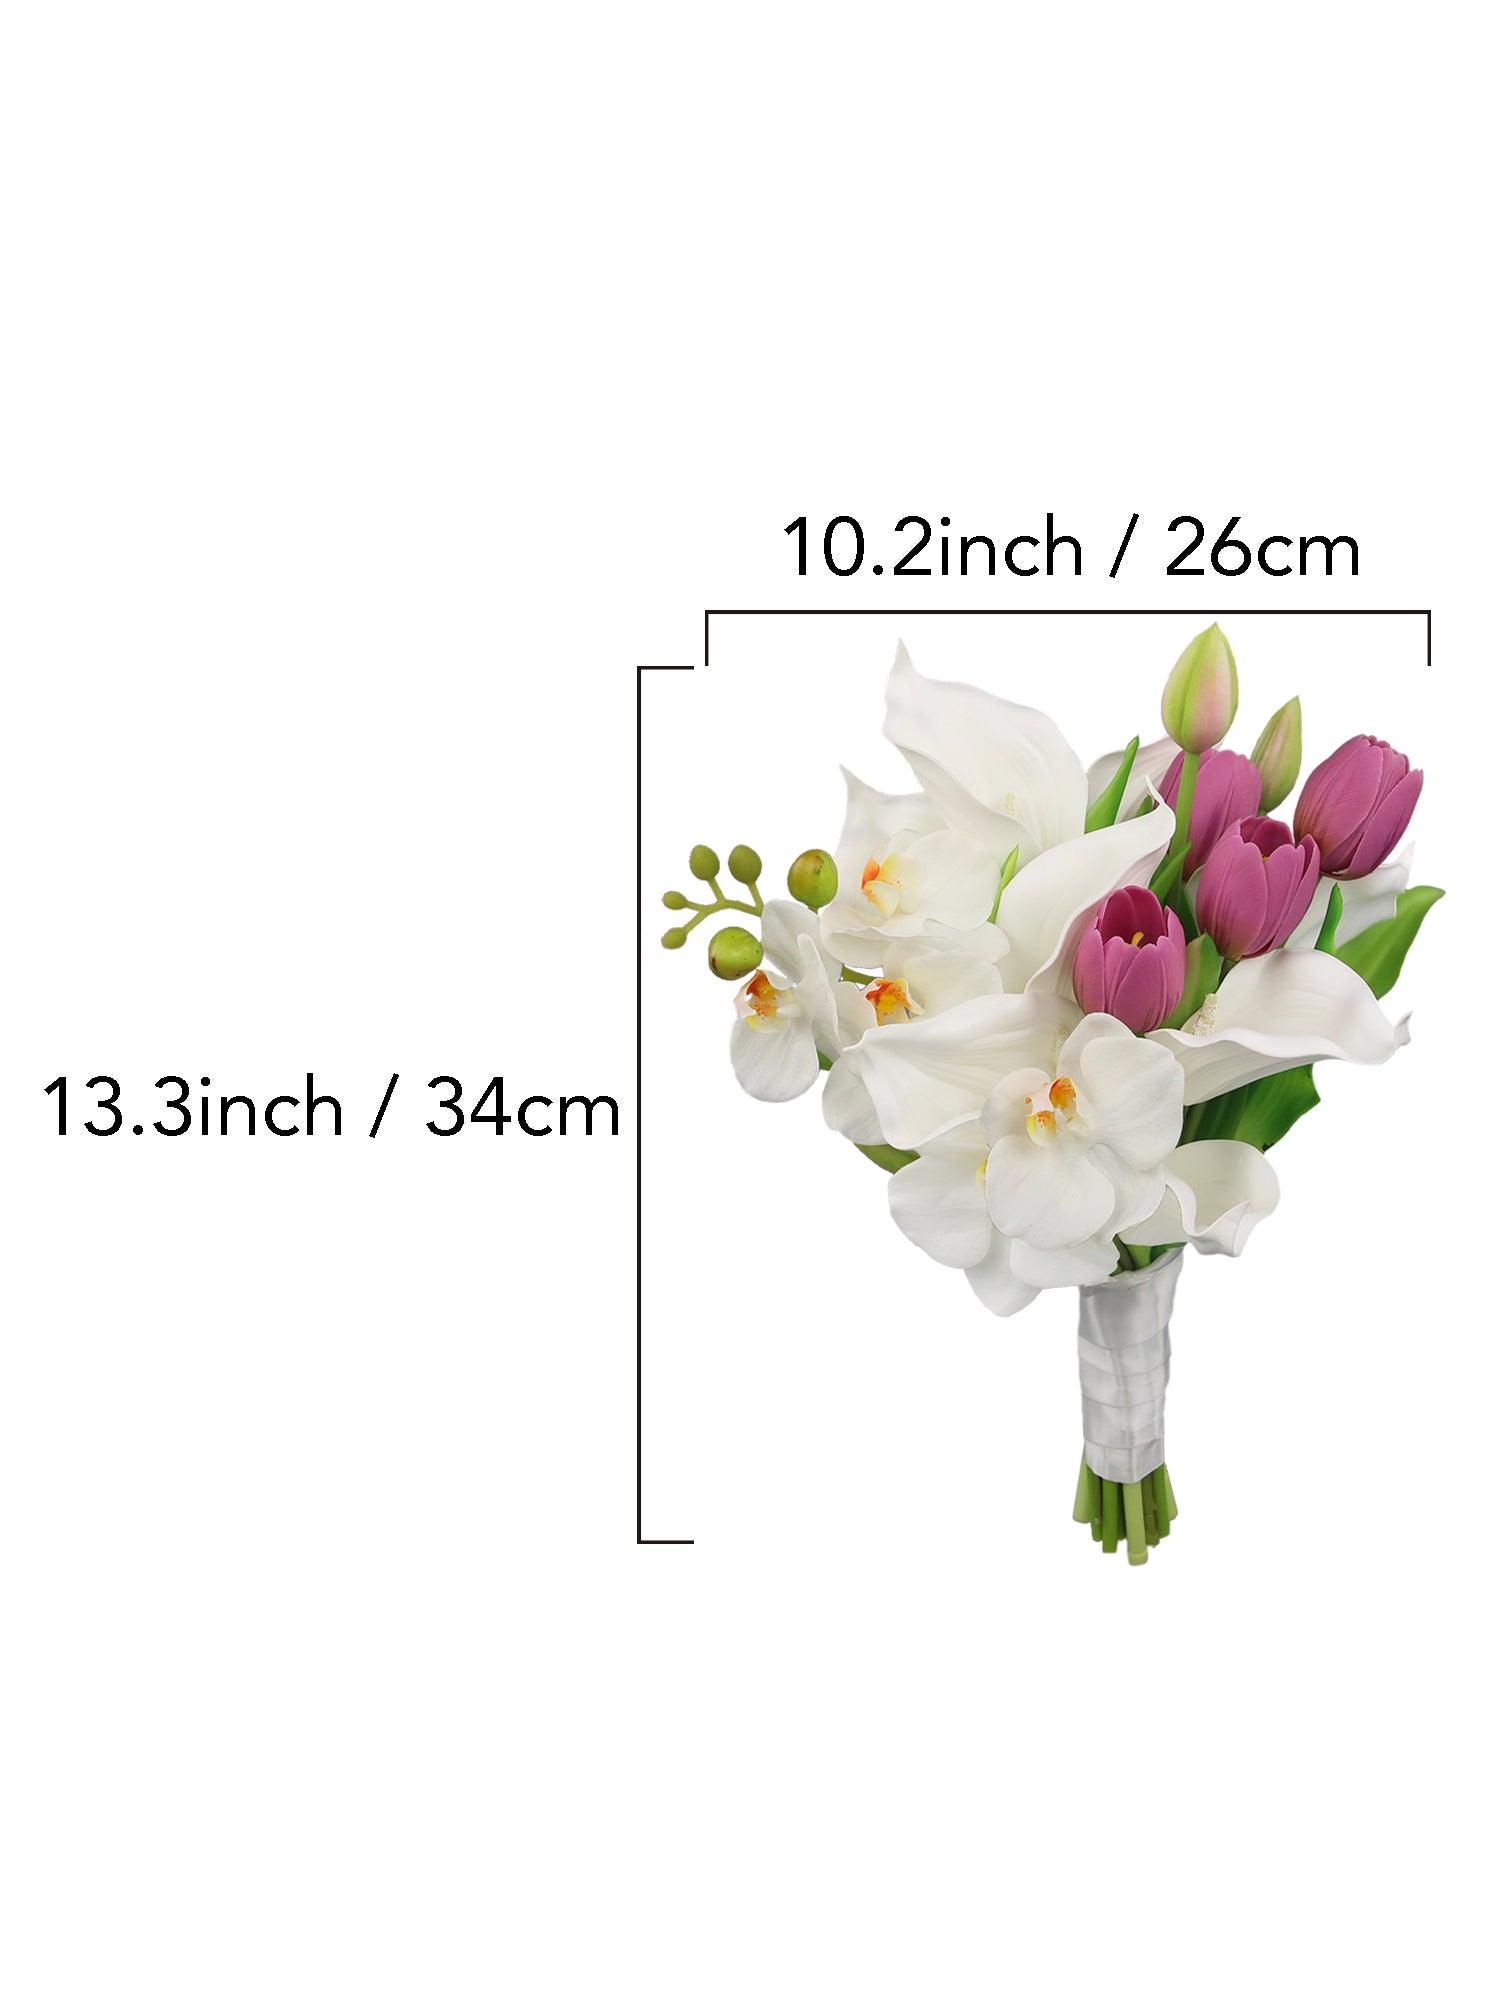 10.2 inch wide Tulips & Orchids Bridal Bouquet - Rinlong Flower